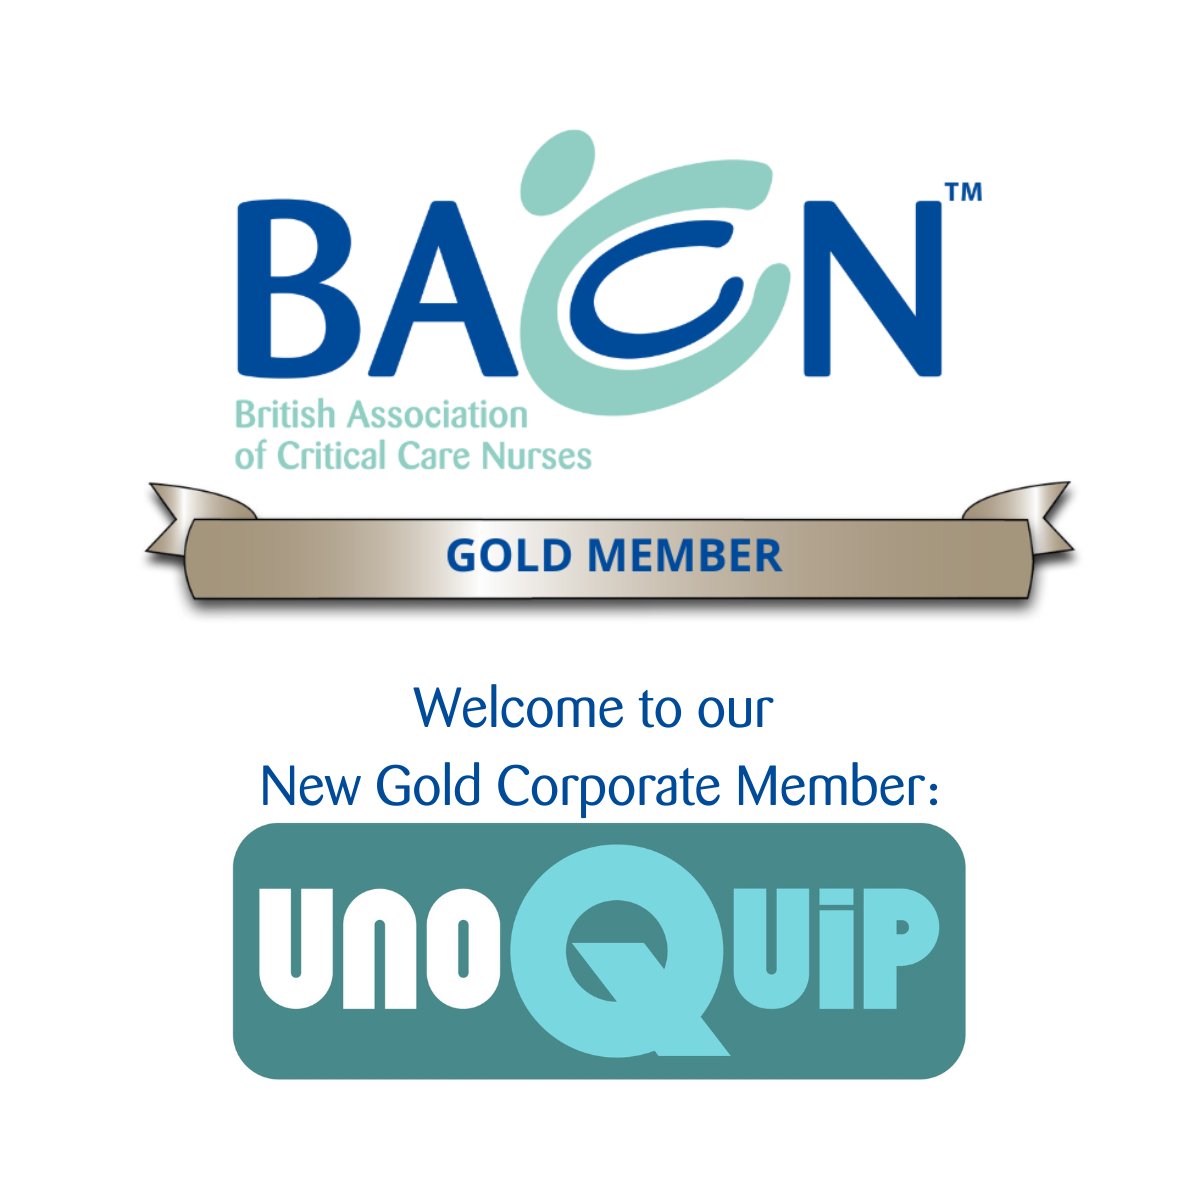 BACCN is delighted to welcome UNOQUIP as a new Corporate Gold Member! UNOQUIP is a global marketer of high-quality single-use medical equipment, including the Q500 Plus Diuresis Measuring System. Read more here: baccn.org/corporate-memb…